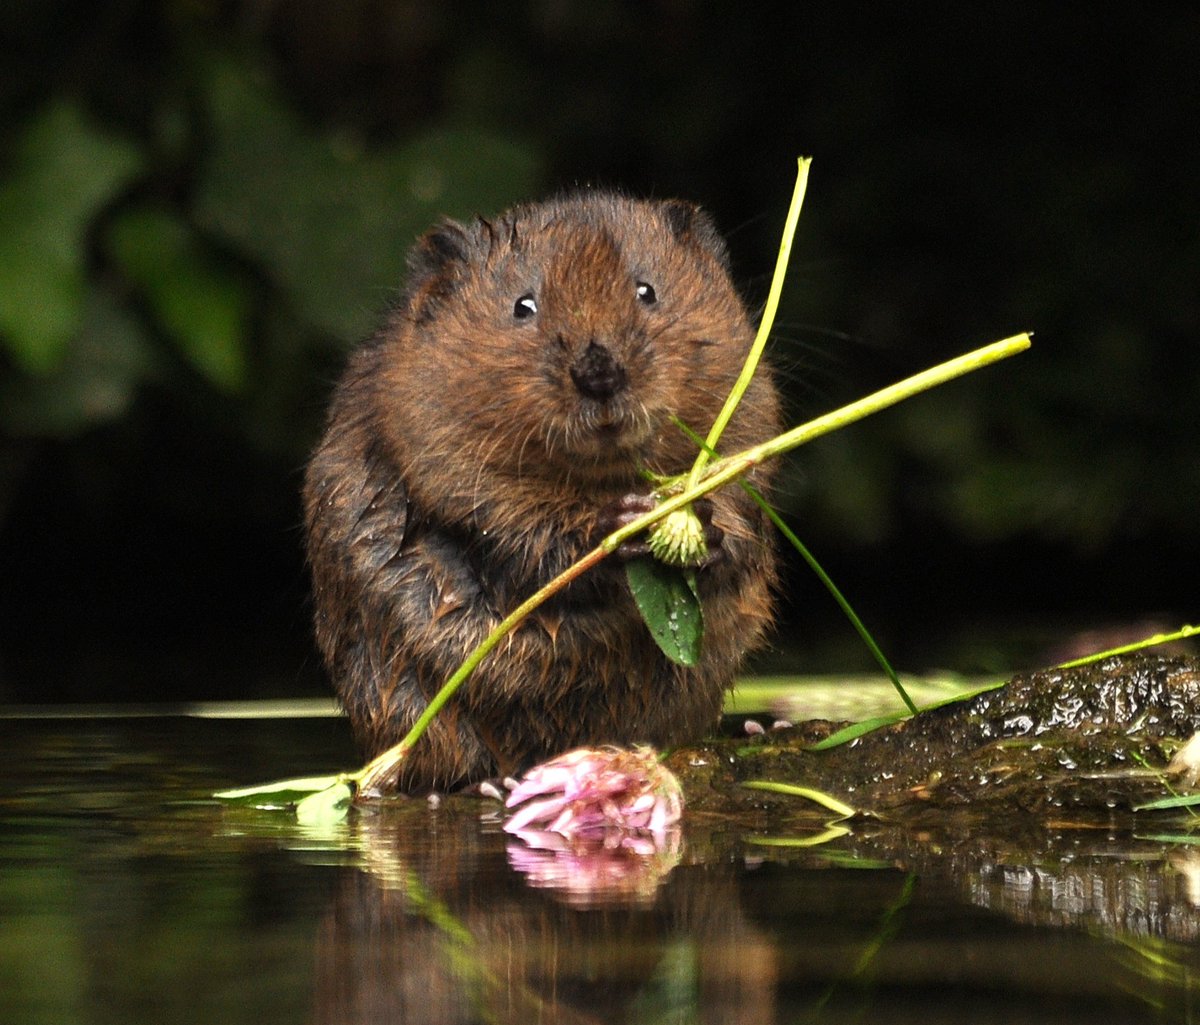 Double your donation to help protect one of our most vulnerable mammals. When you donate to our appeal this week through the @BigGive your gift will go twice as far. One donation, twice the impact 🎁🎁 Help water voles today 👉 donate.biggive.org/campaign/a0569… 📸Samib123 | Shutterstock